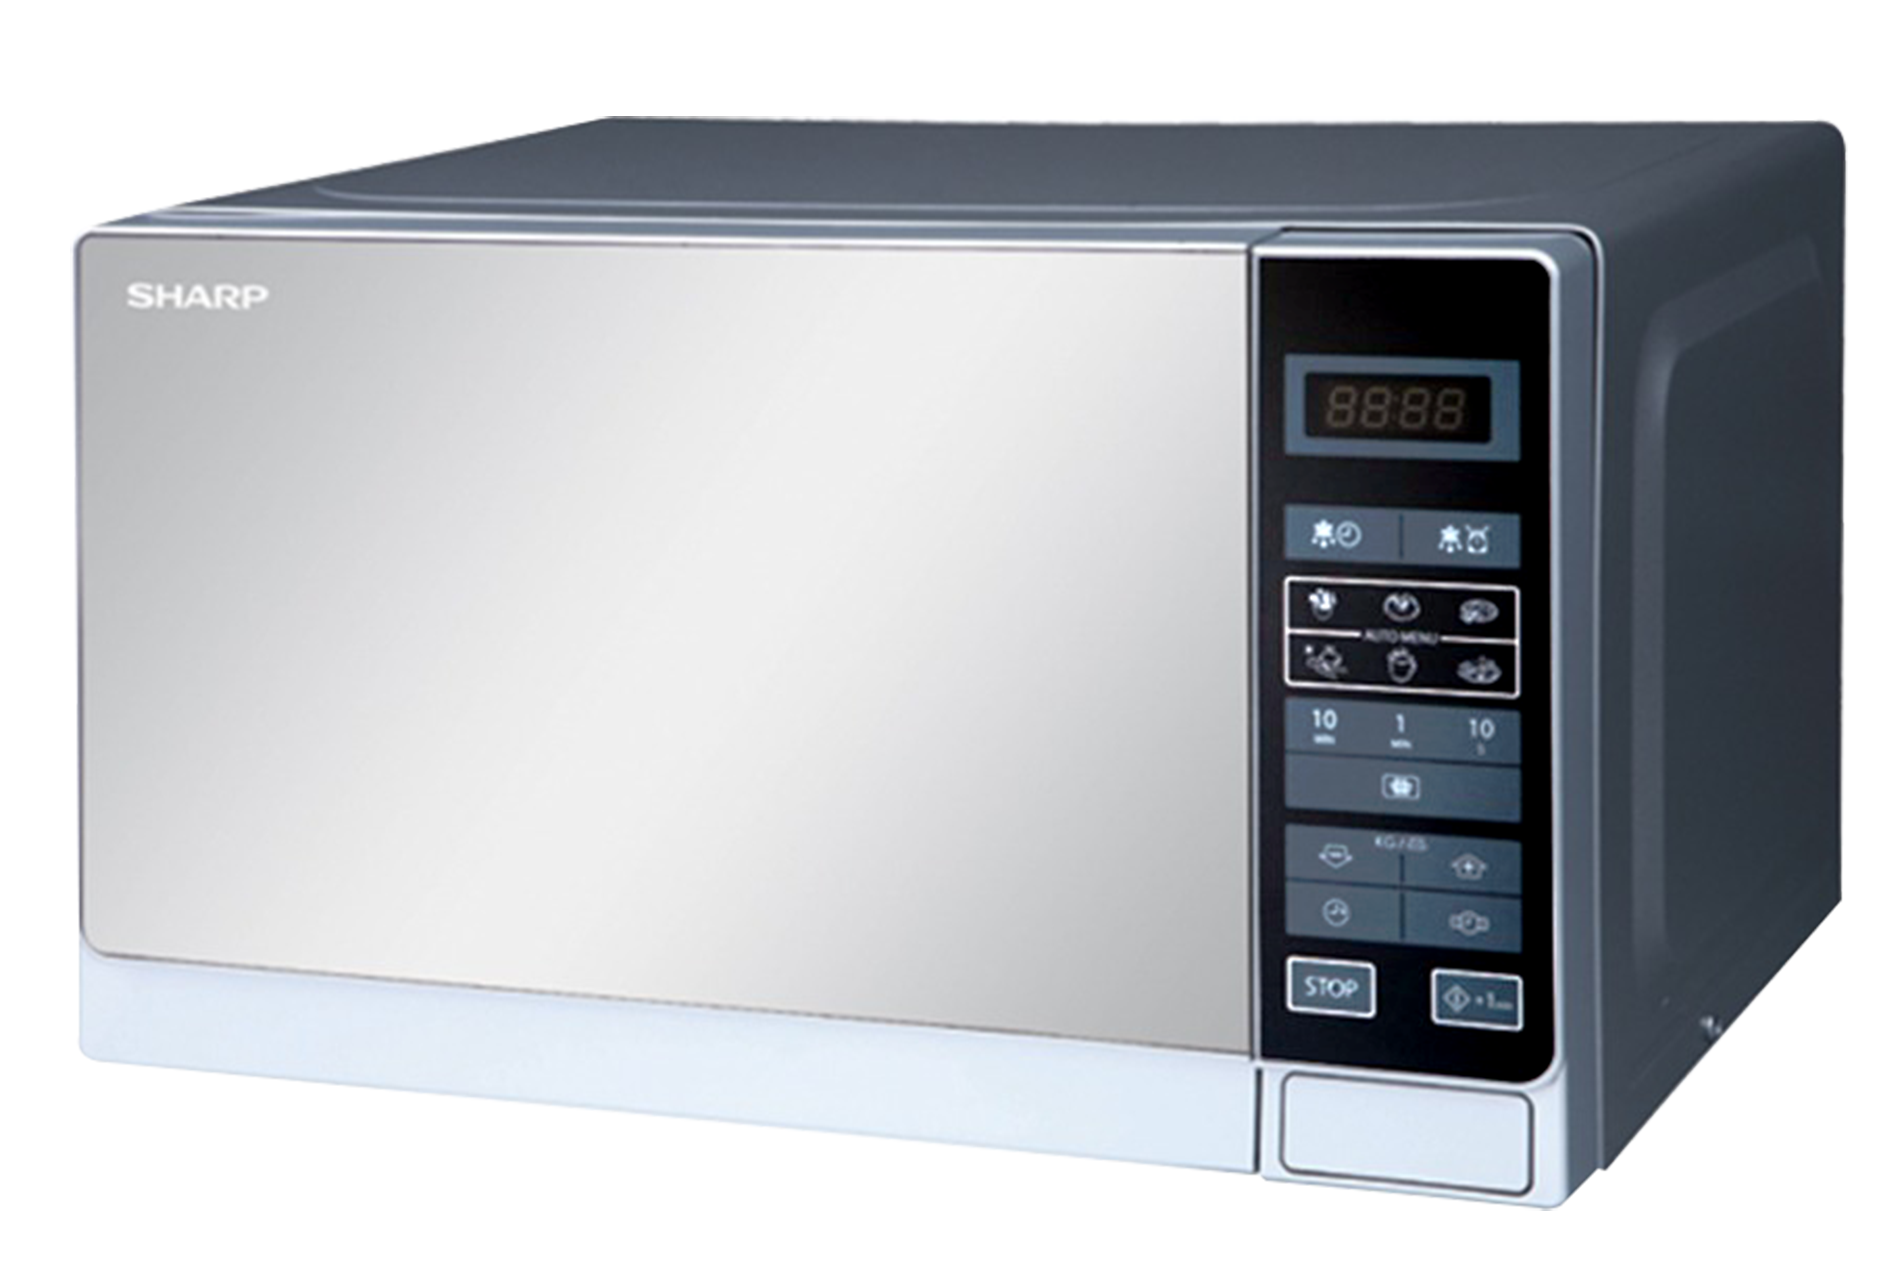 Sharp 20 Liters Microwave Oven Model: R-20MT{S) - Electronics